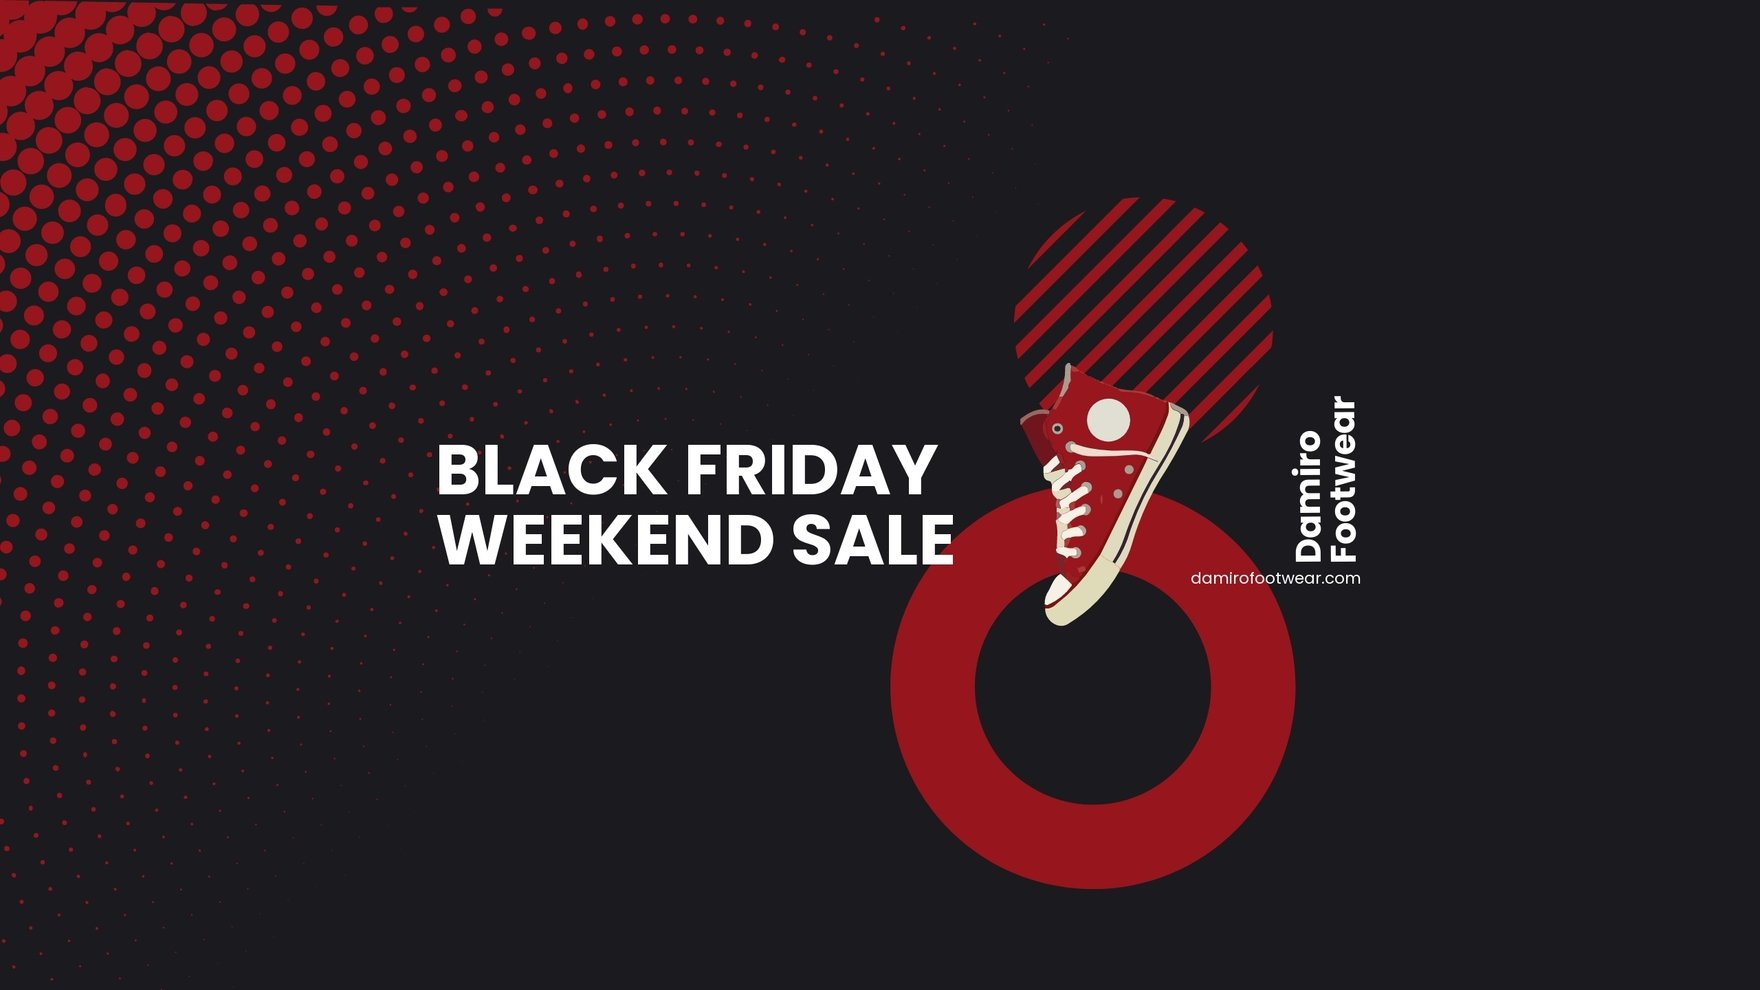 Black Friday Weekend Sale Youtube Banner Template